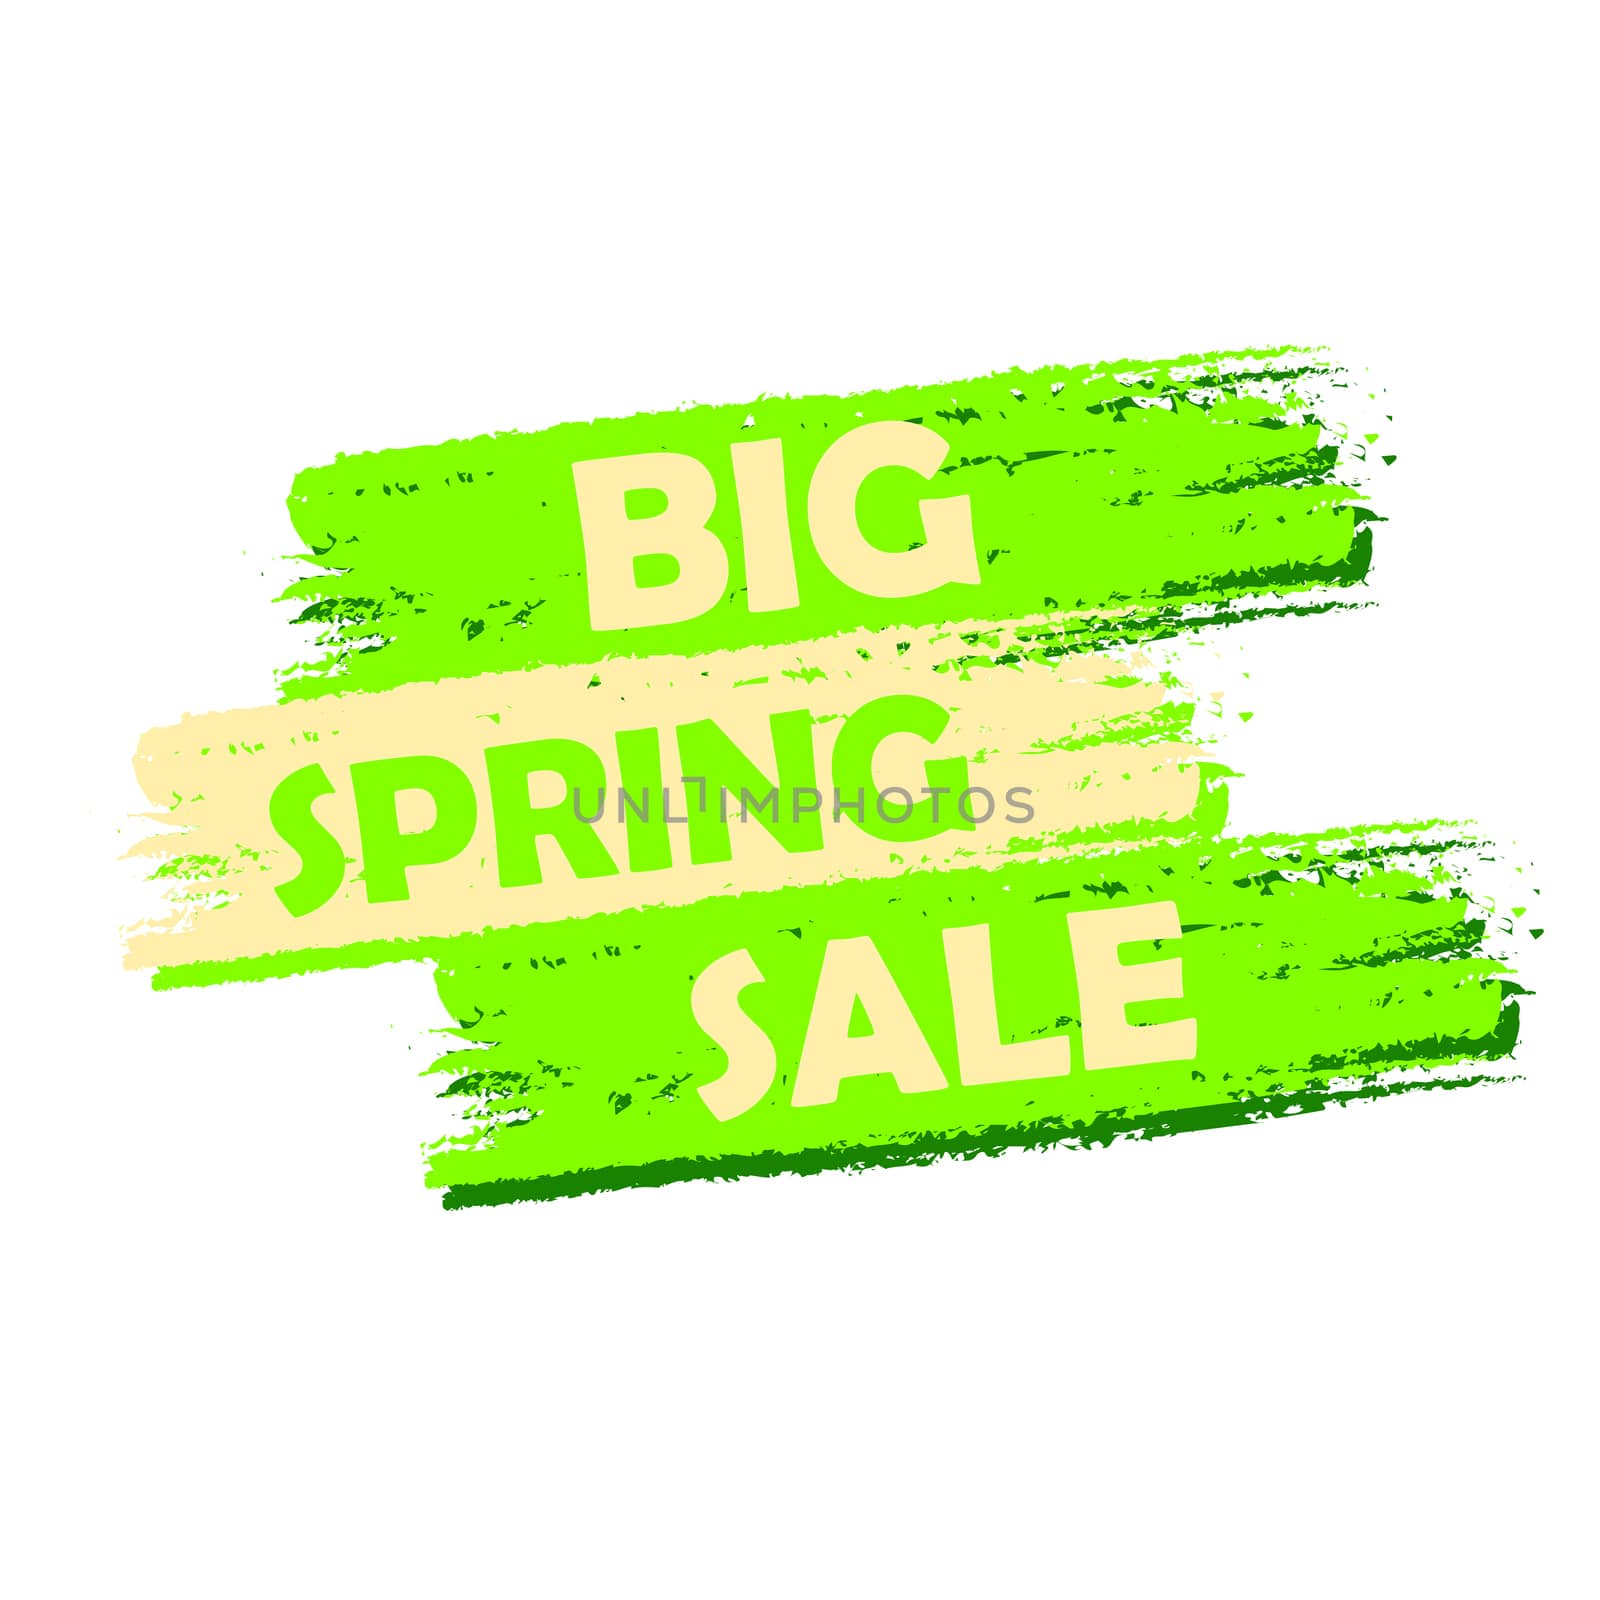 big spring sale banner - text in green drawn label, business shopping seasonal concept